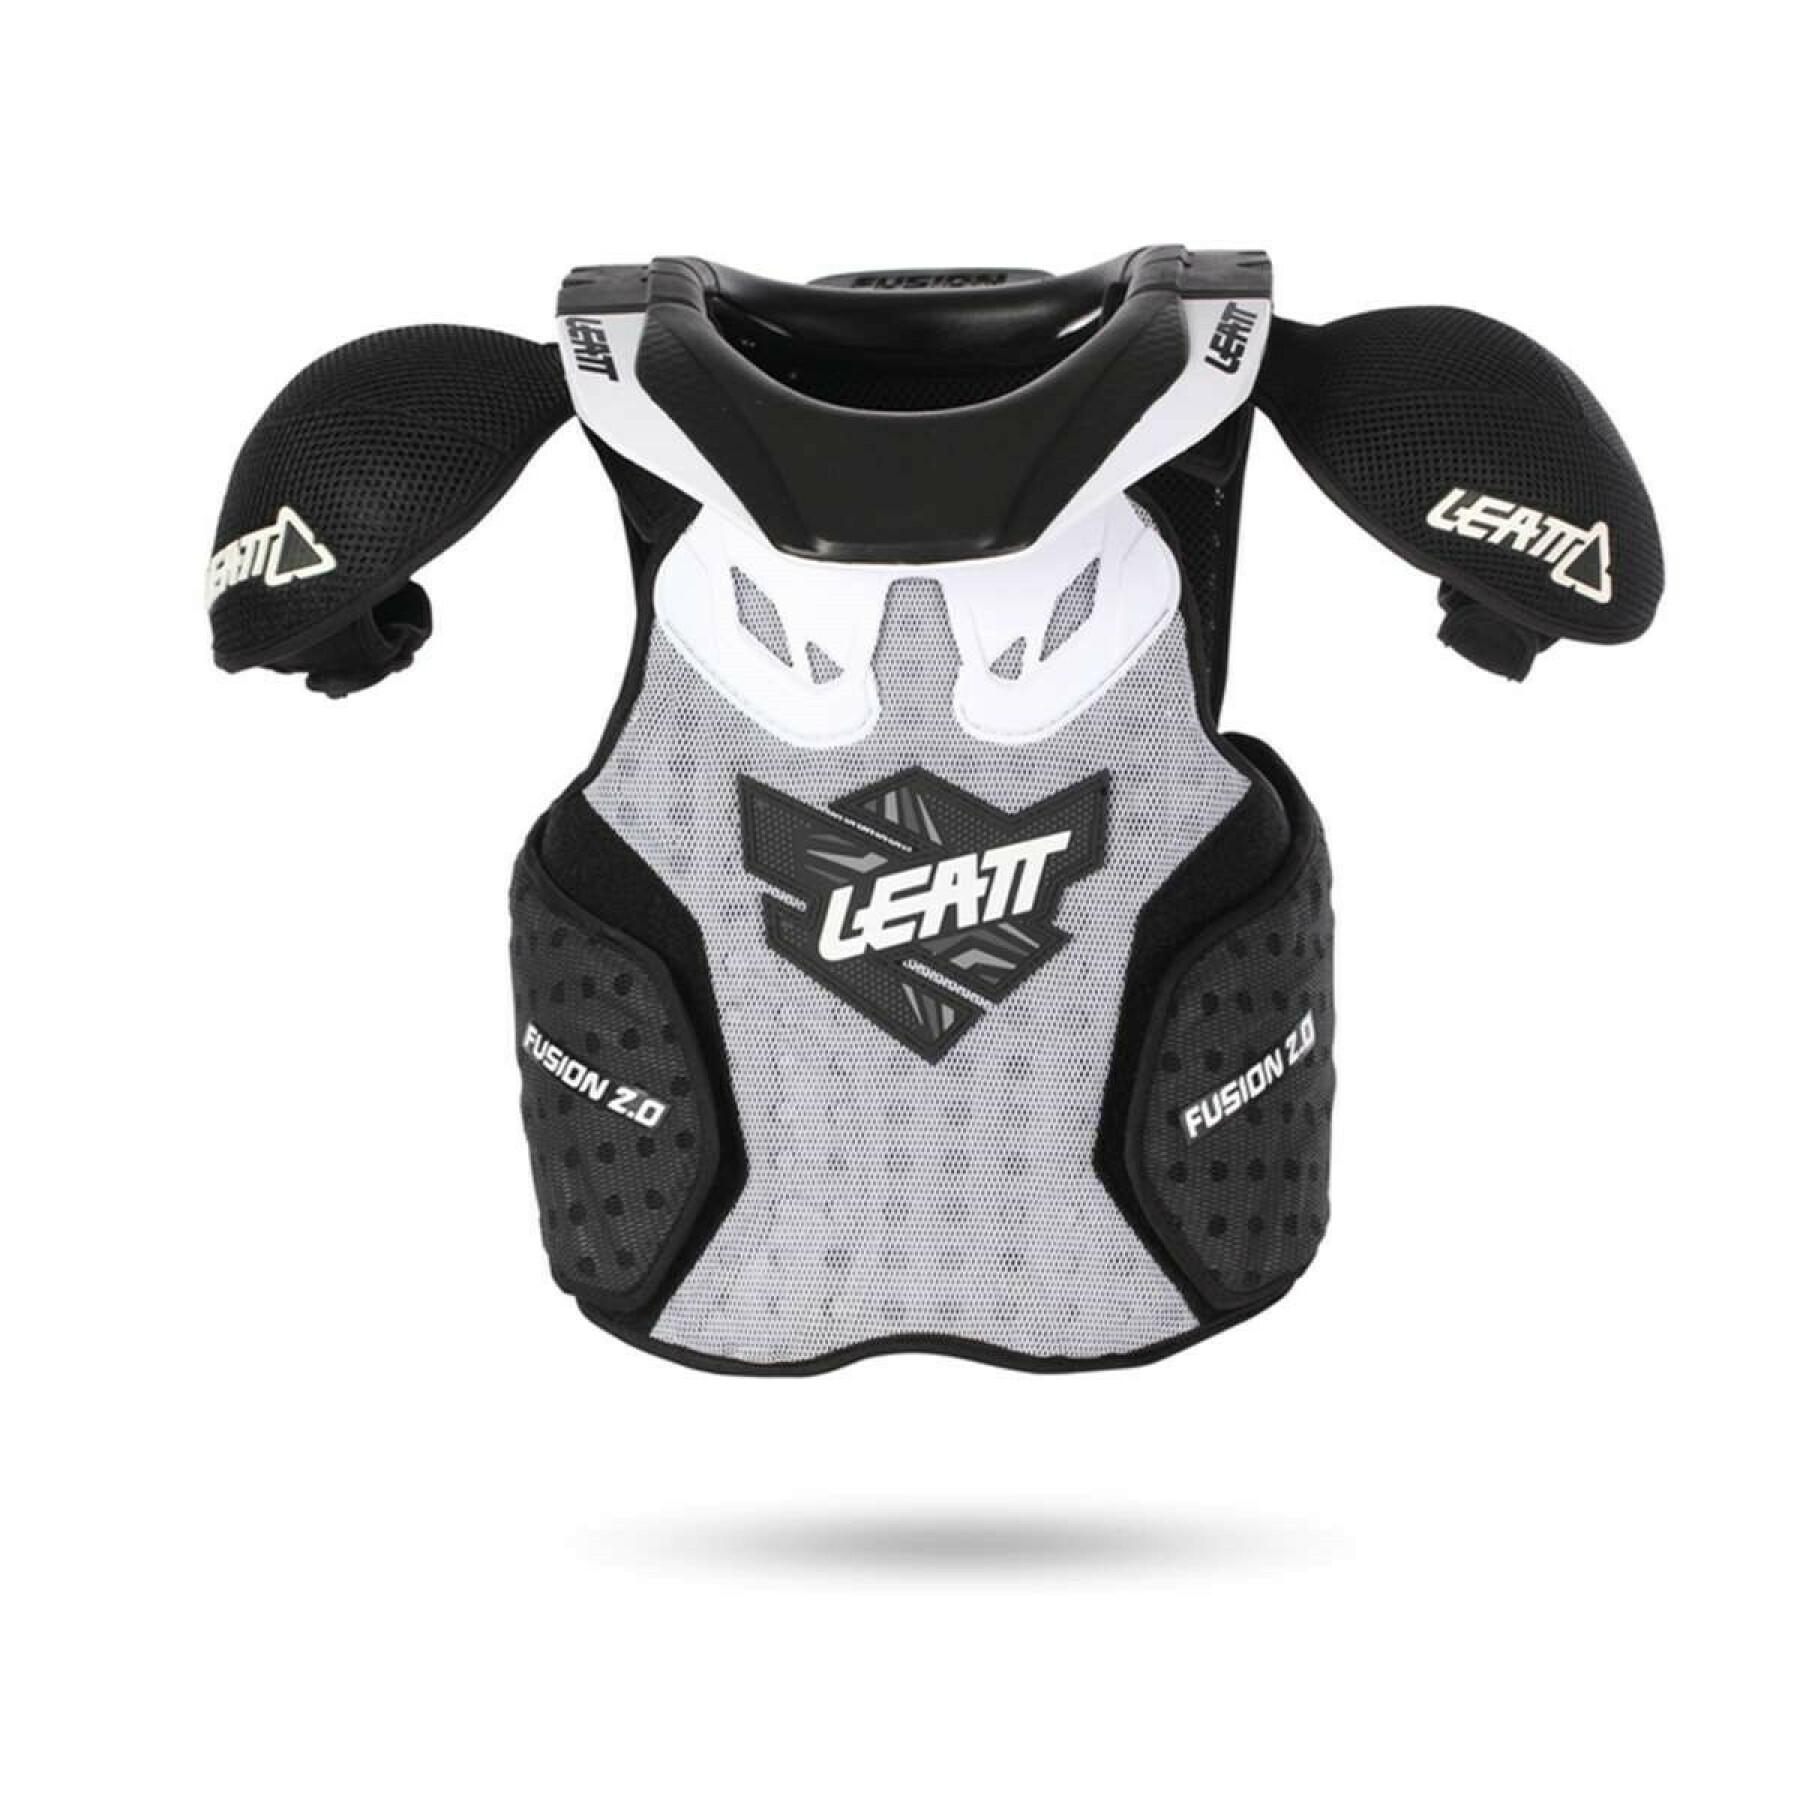 Child's motorcycle chest protector Leatt fusion vest 2.0